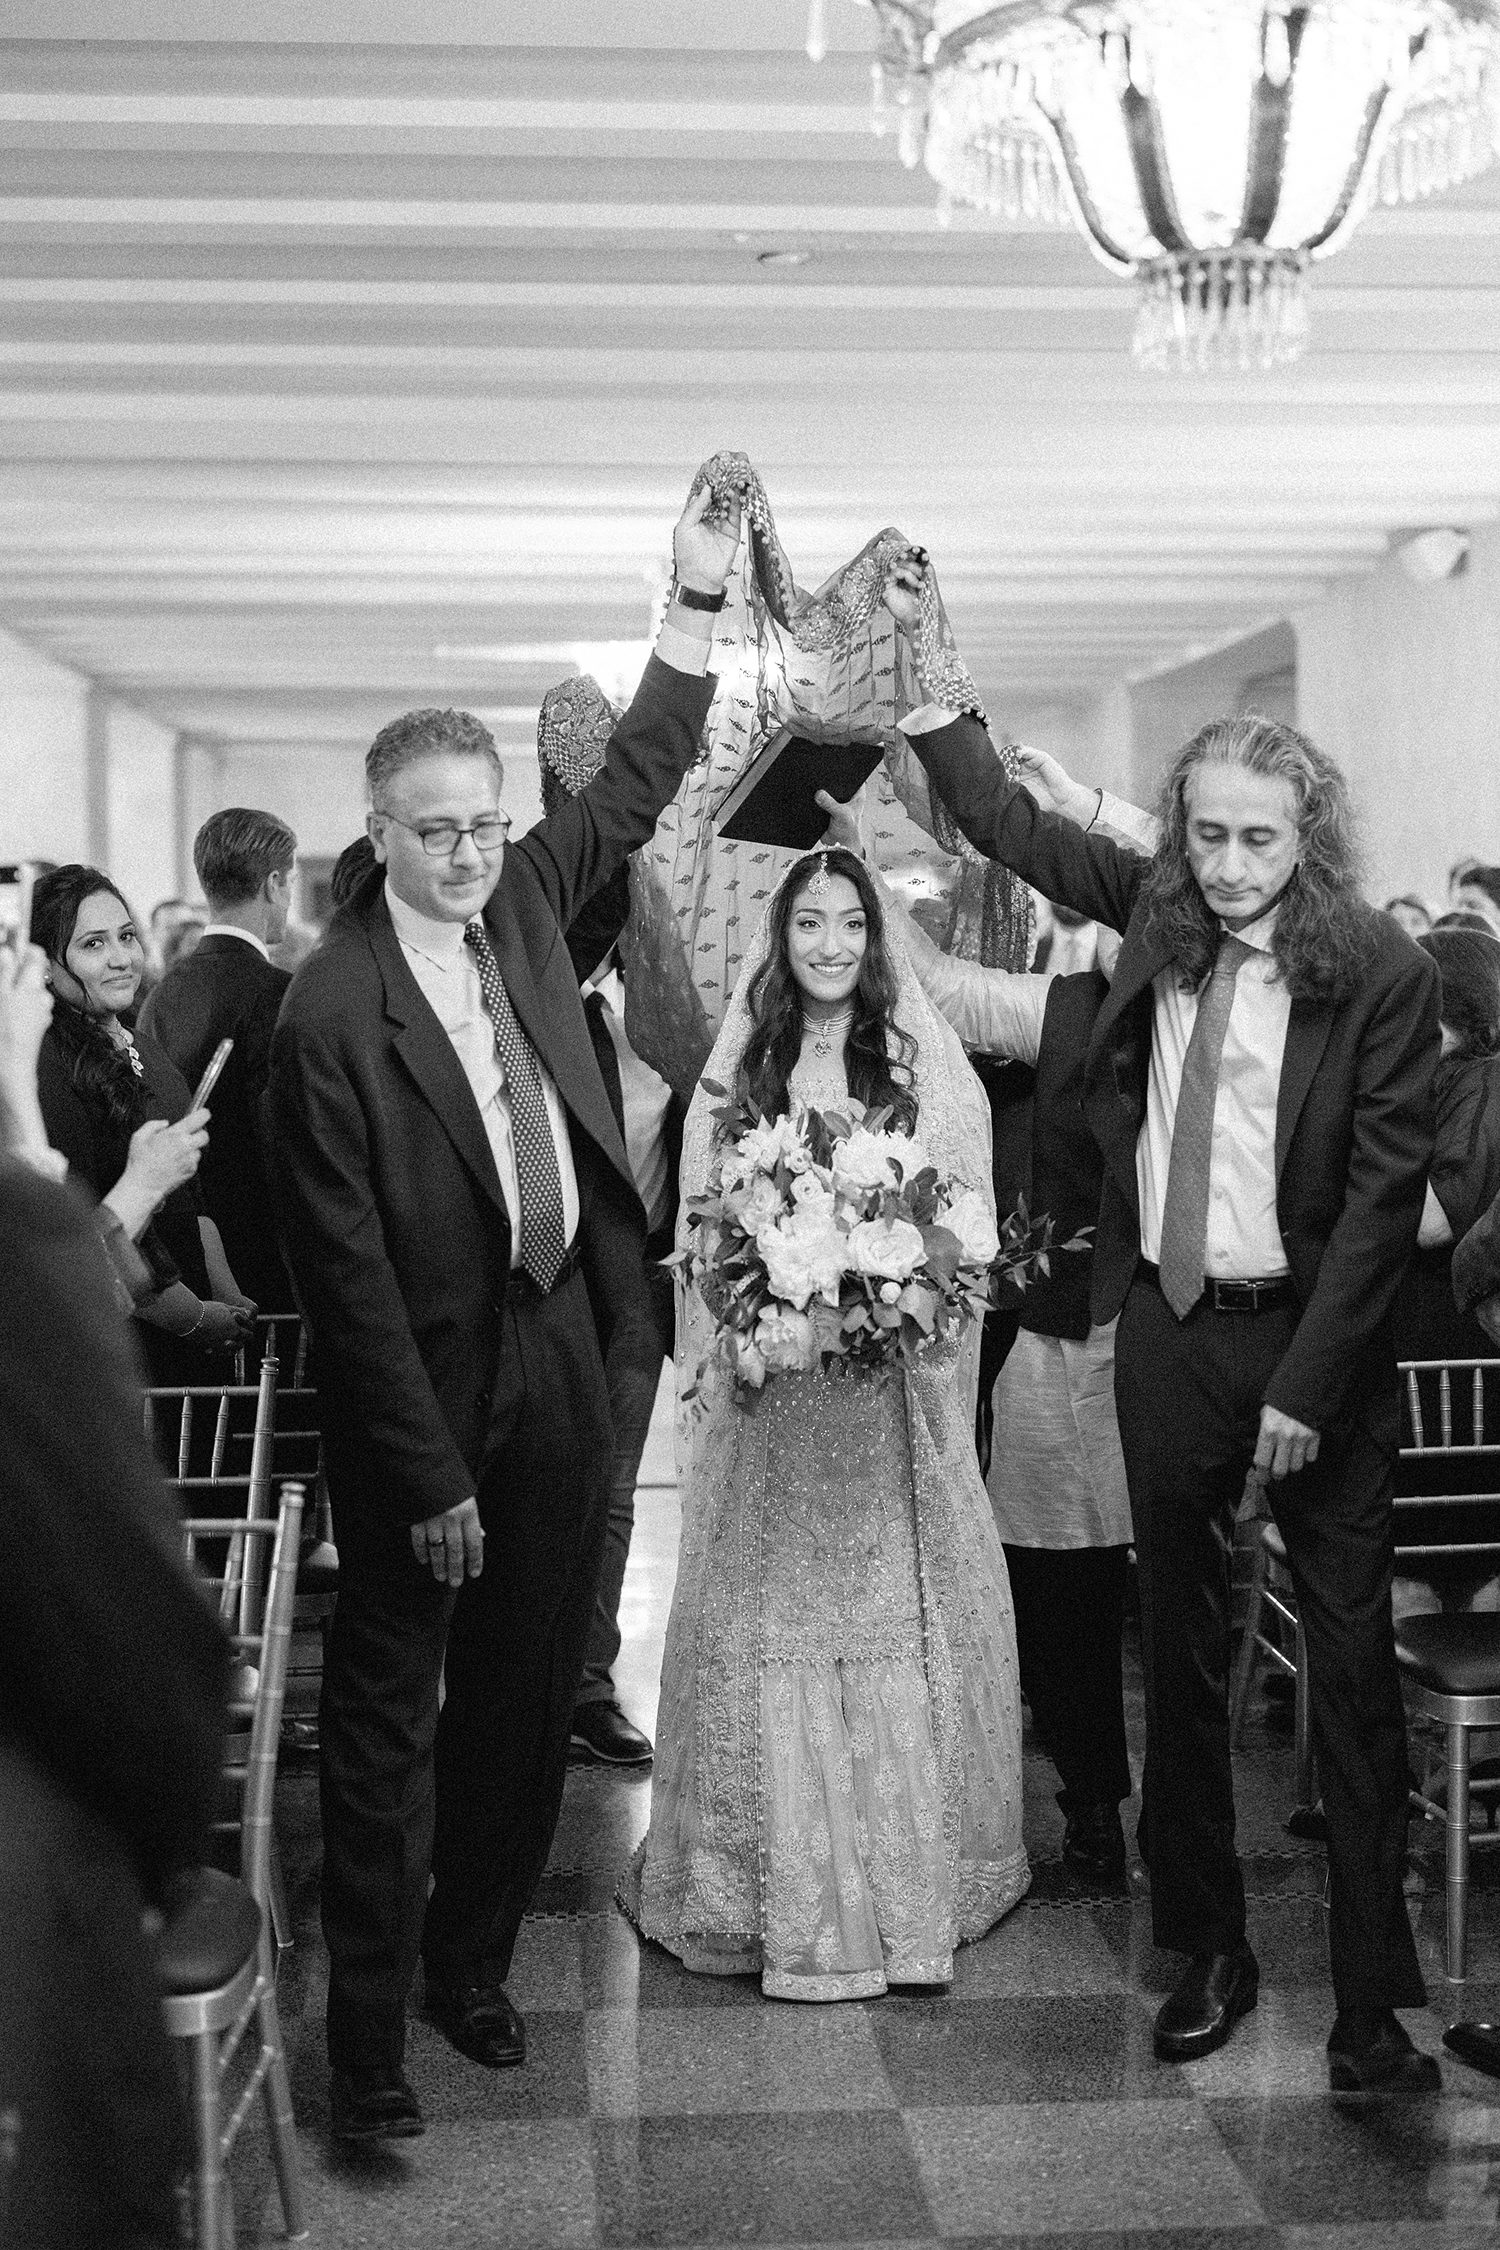 multi cultural Buffalo wedding ceremony with Jewish elements | photo by Mary Dougherty